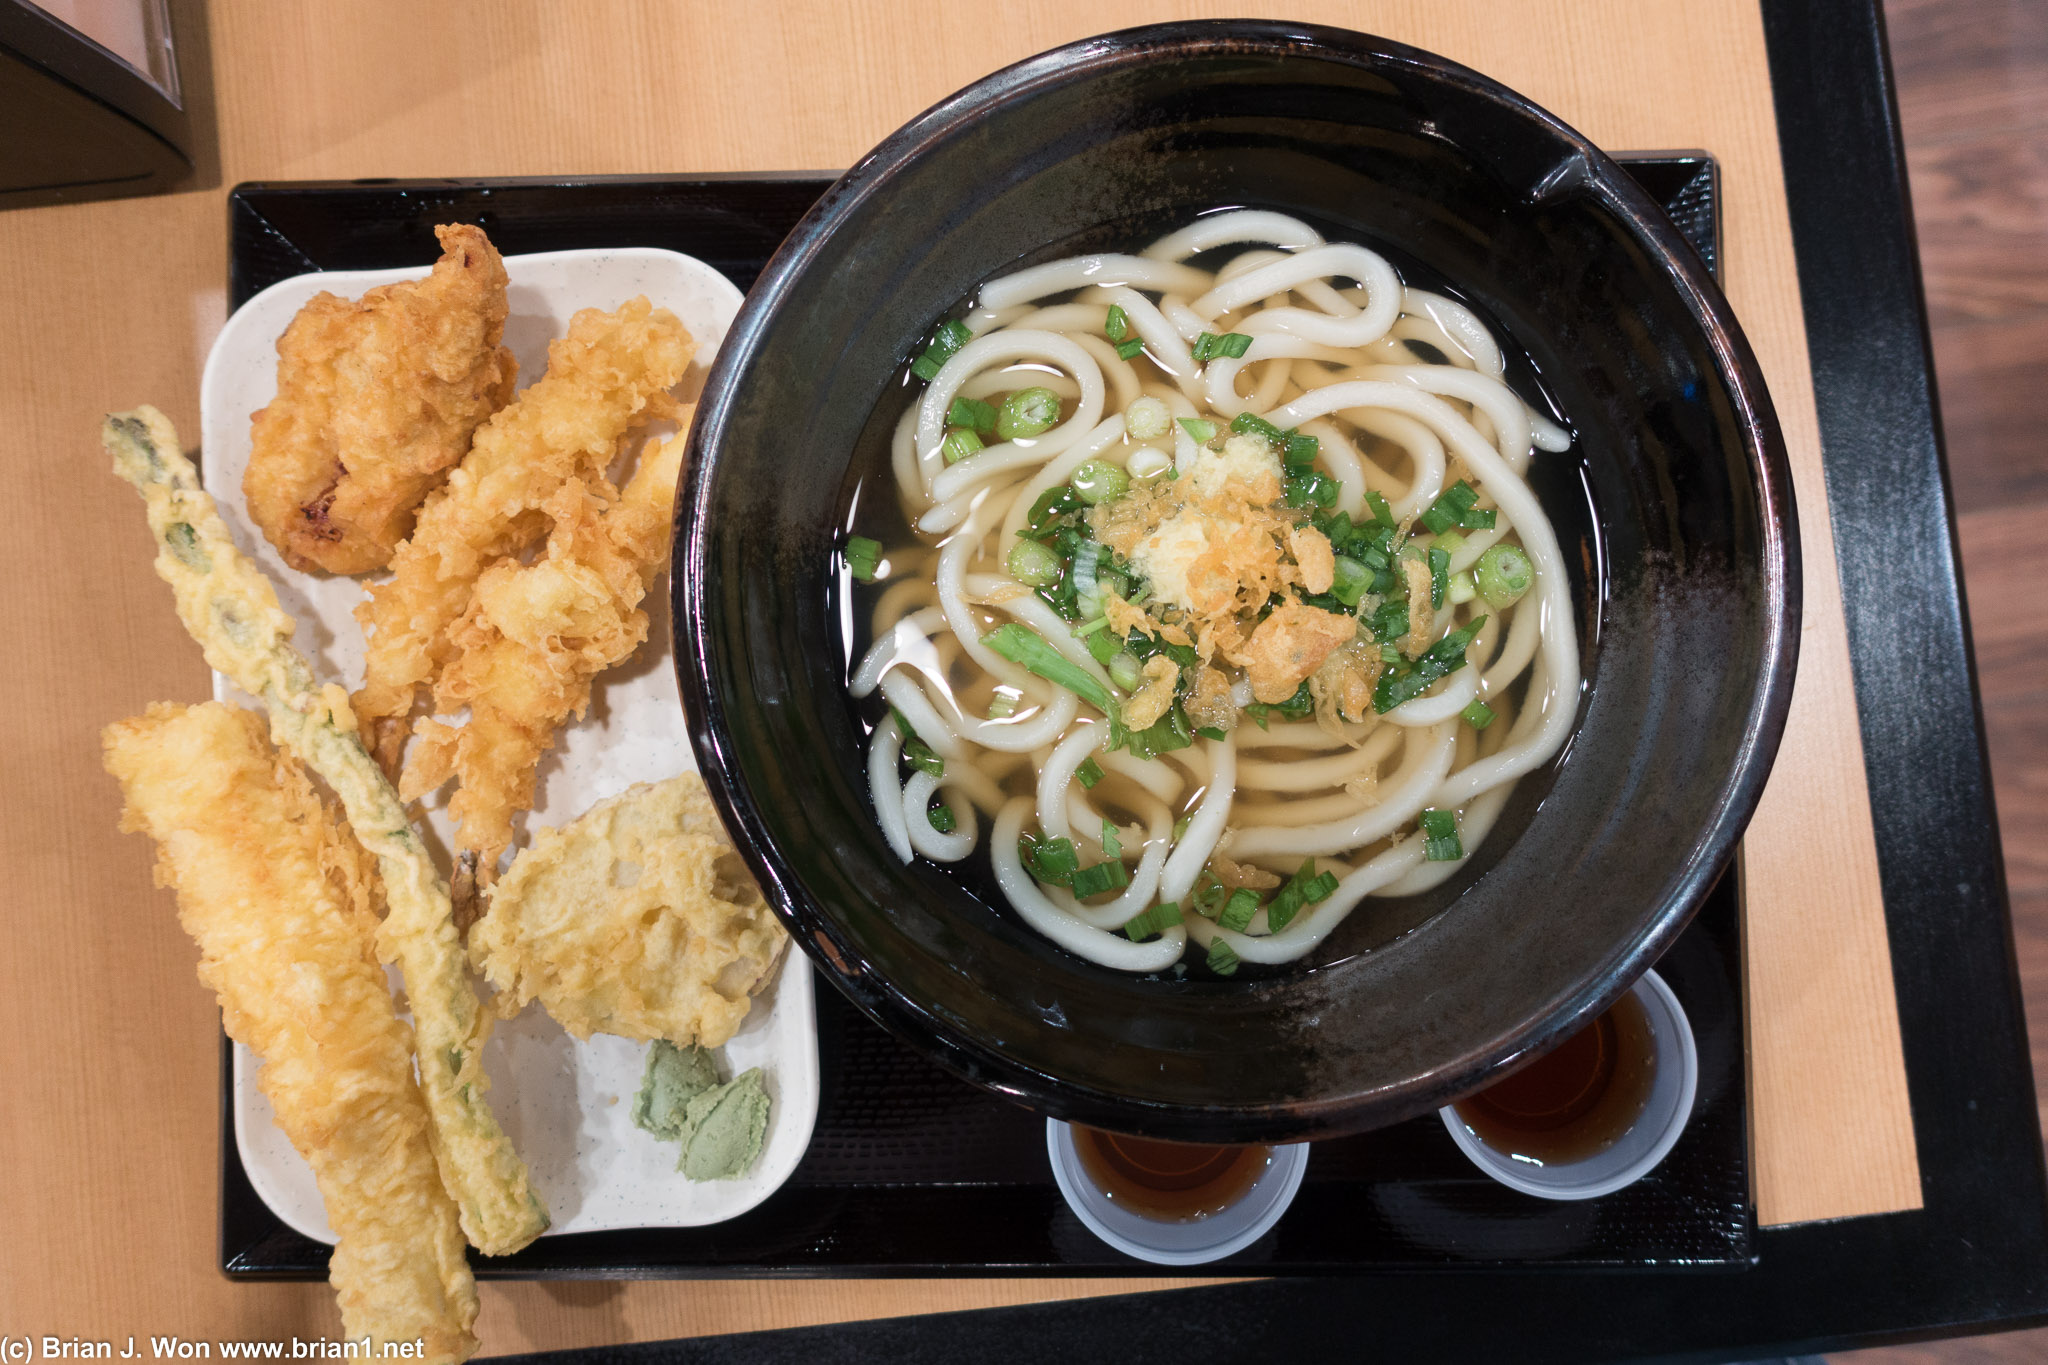 Kaka udon with several tempura sides and toppings.